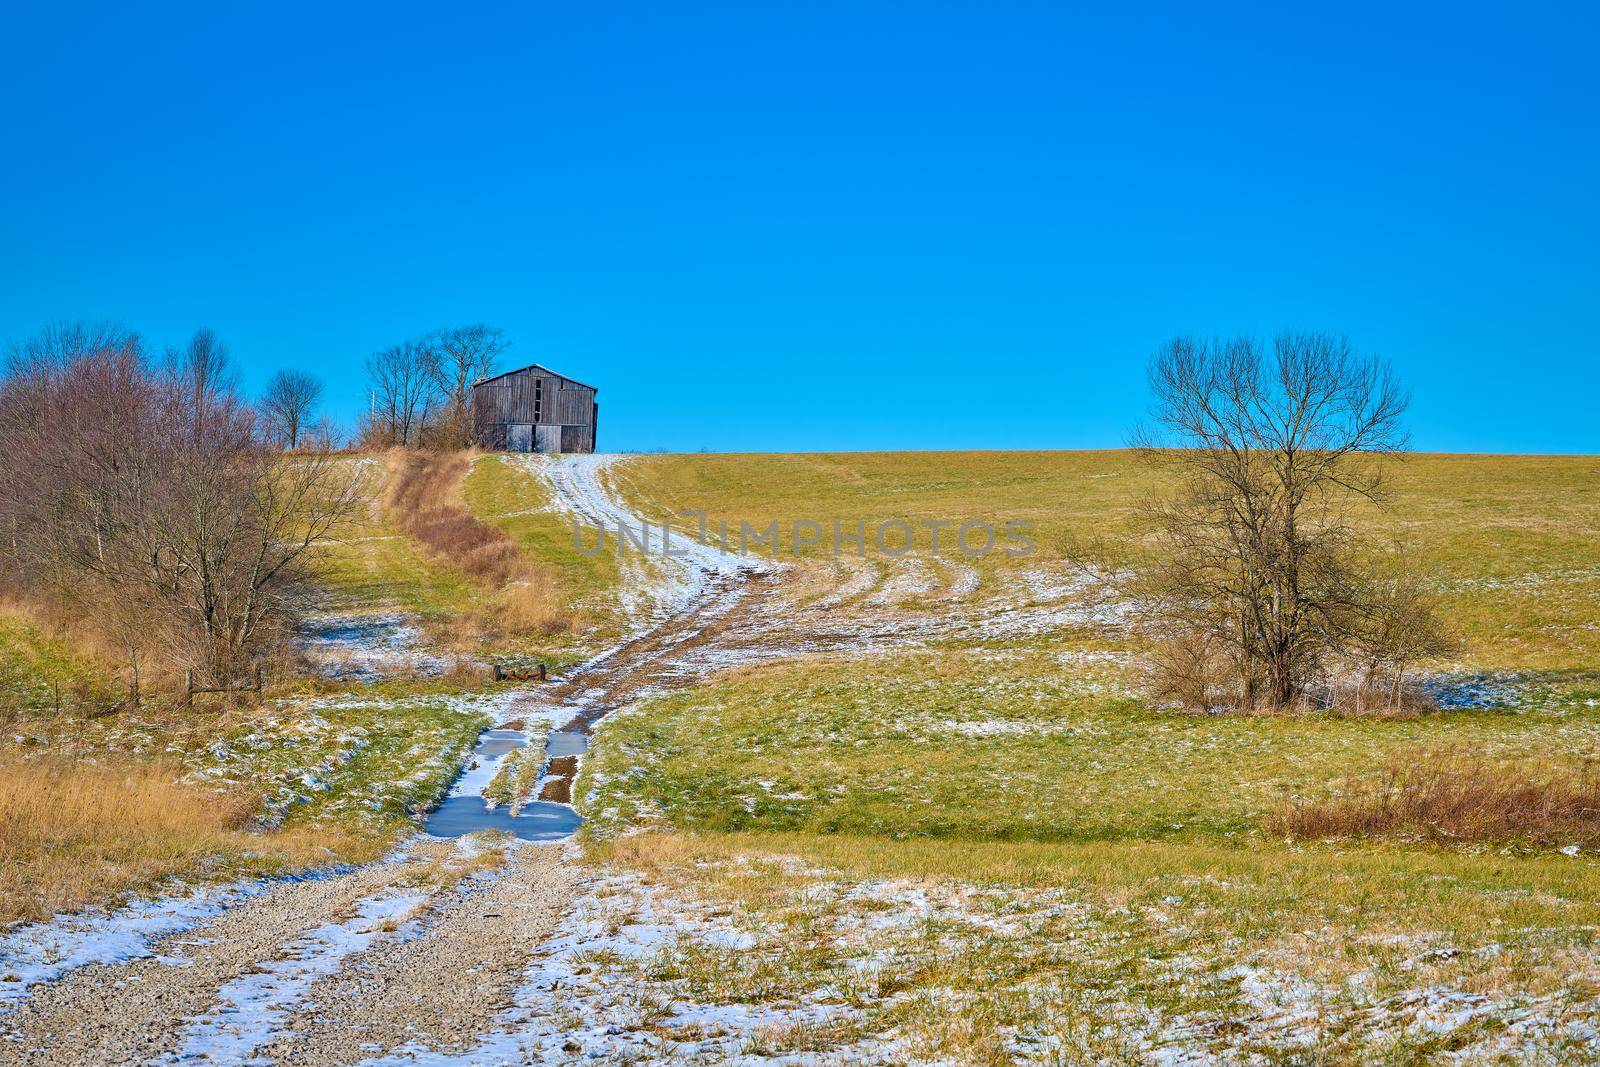 Tobacco barn sitting on a hill with snow covered path.